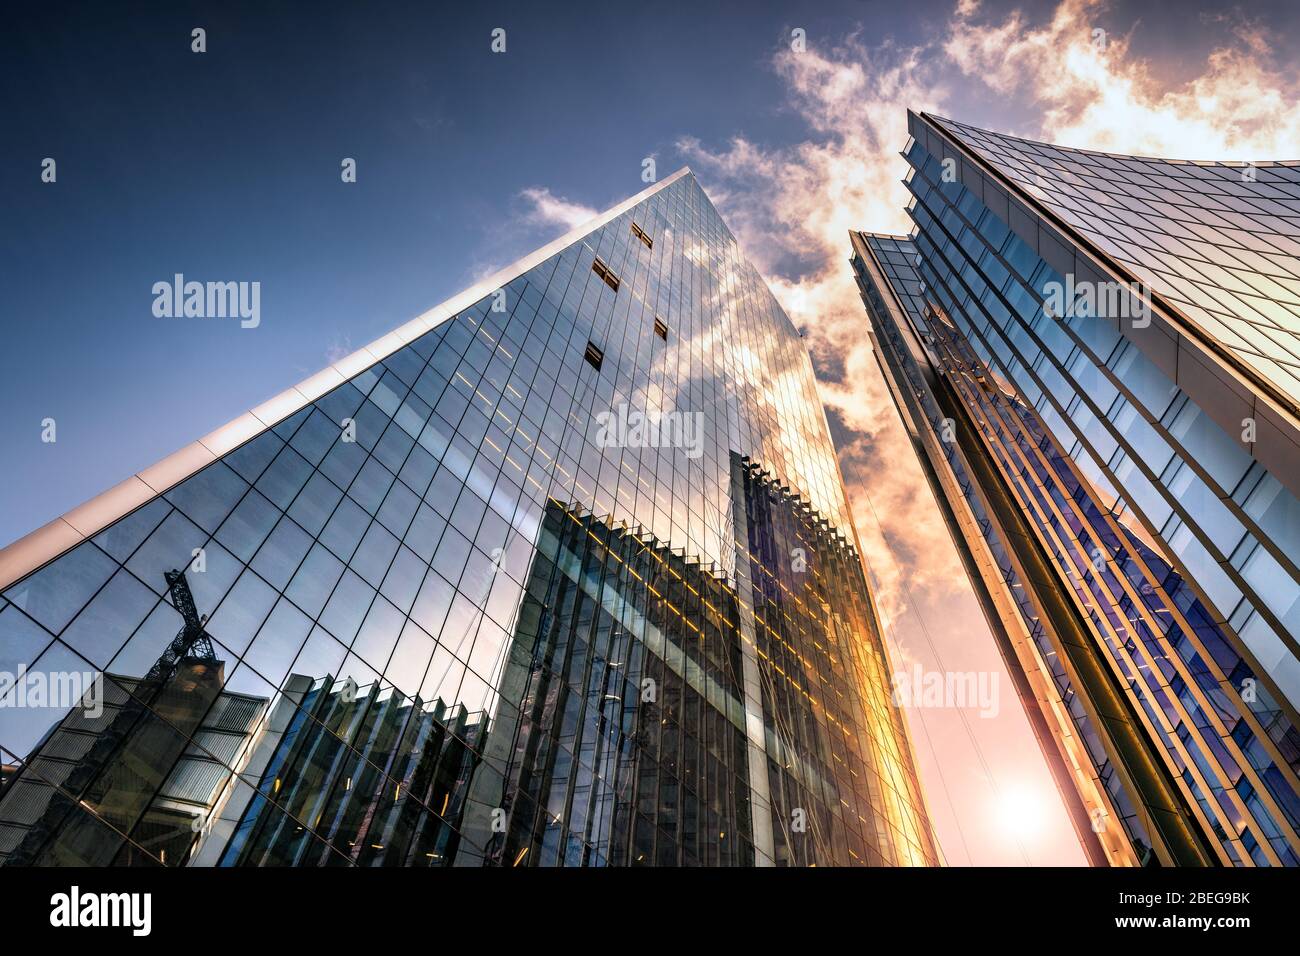 Low angle view of tall corporate glass skyscrapers reflecting a blue sky with white clouds Stock Photo